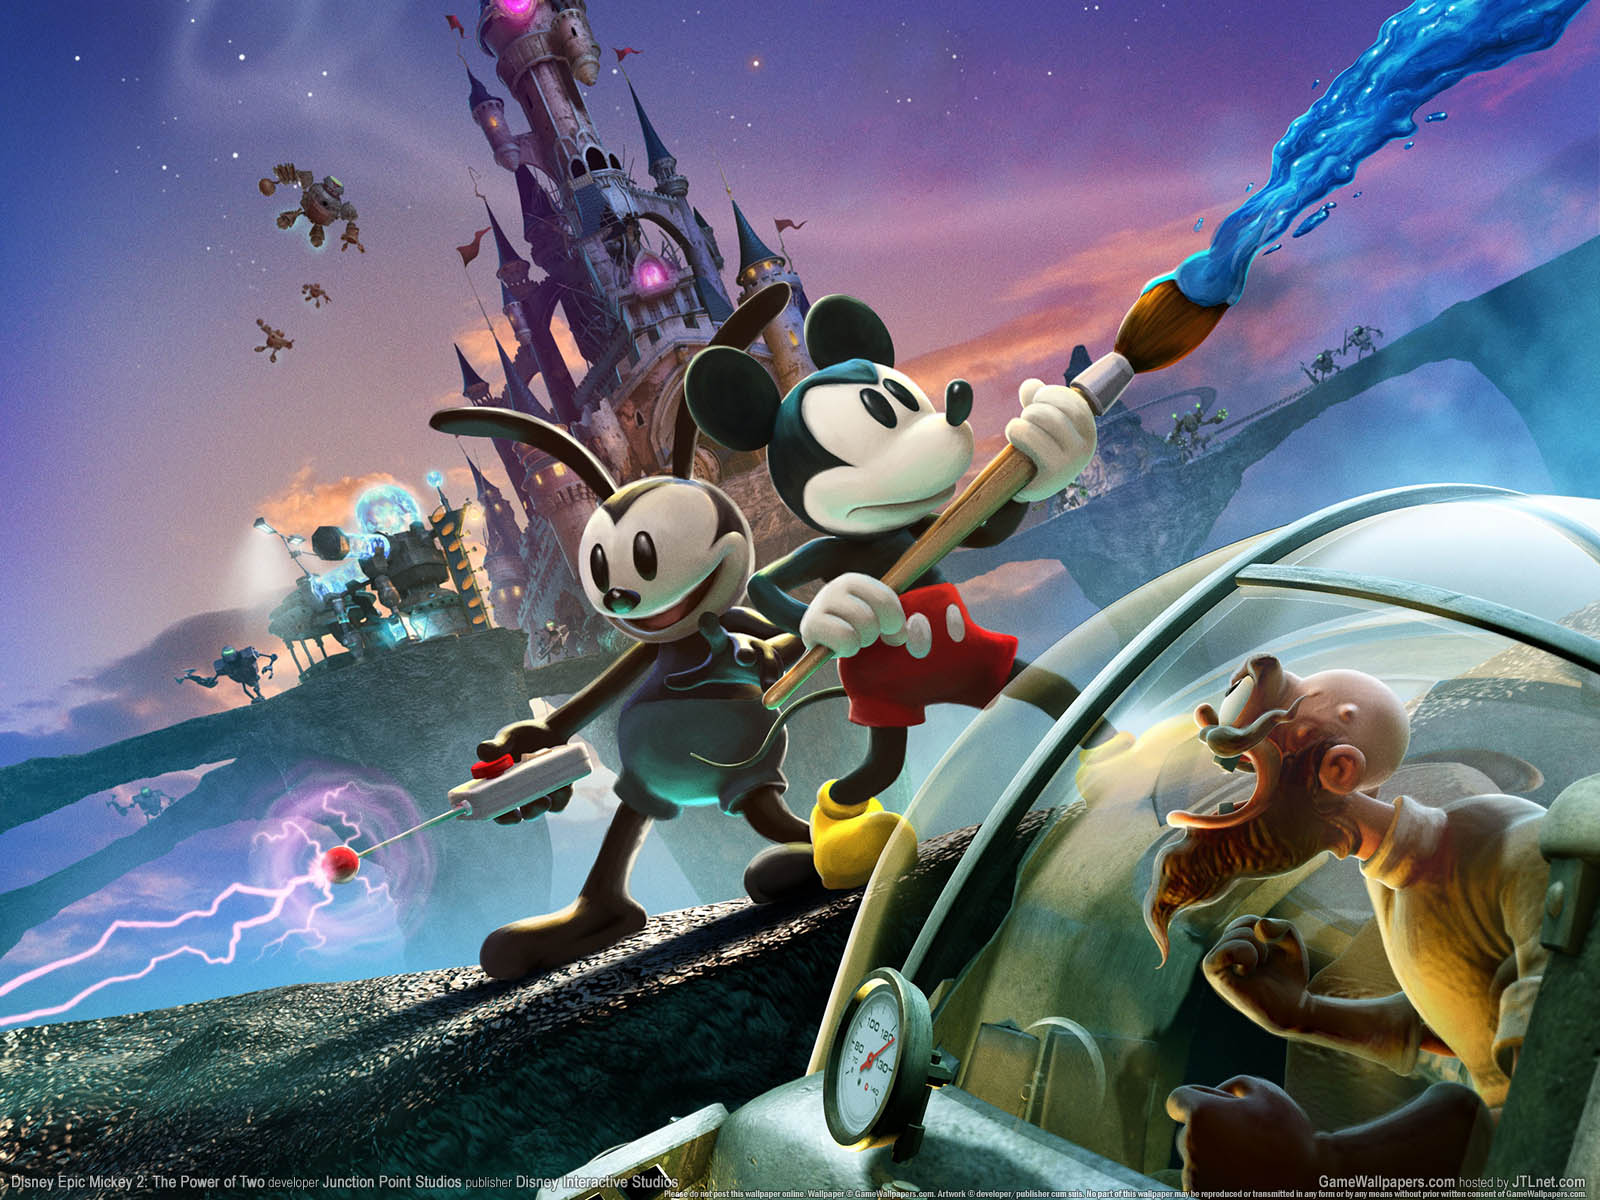 Disney Epic Mickey 2%3A The Power of Two wallpaper 01 1600x1200